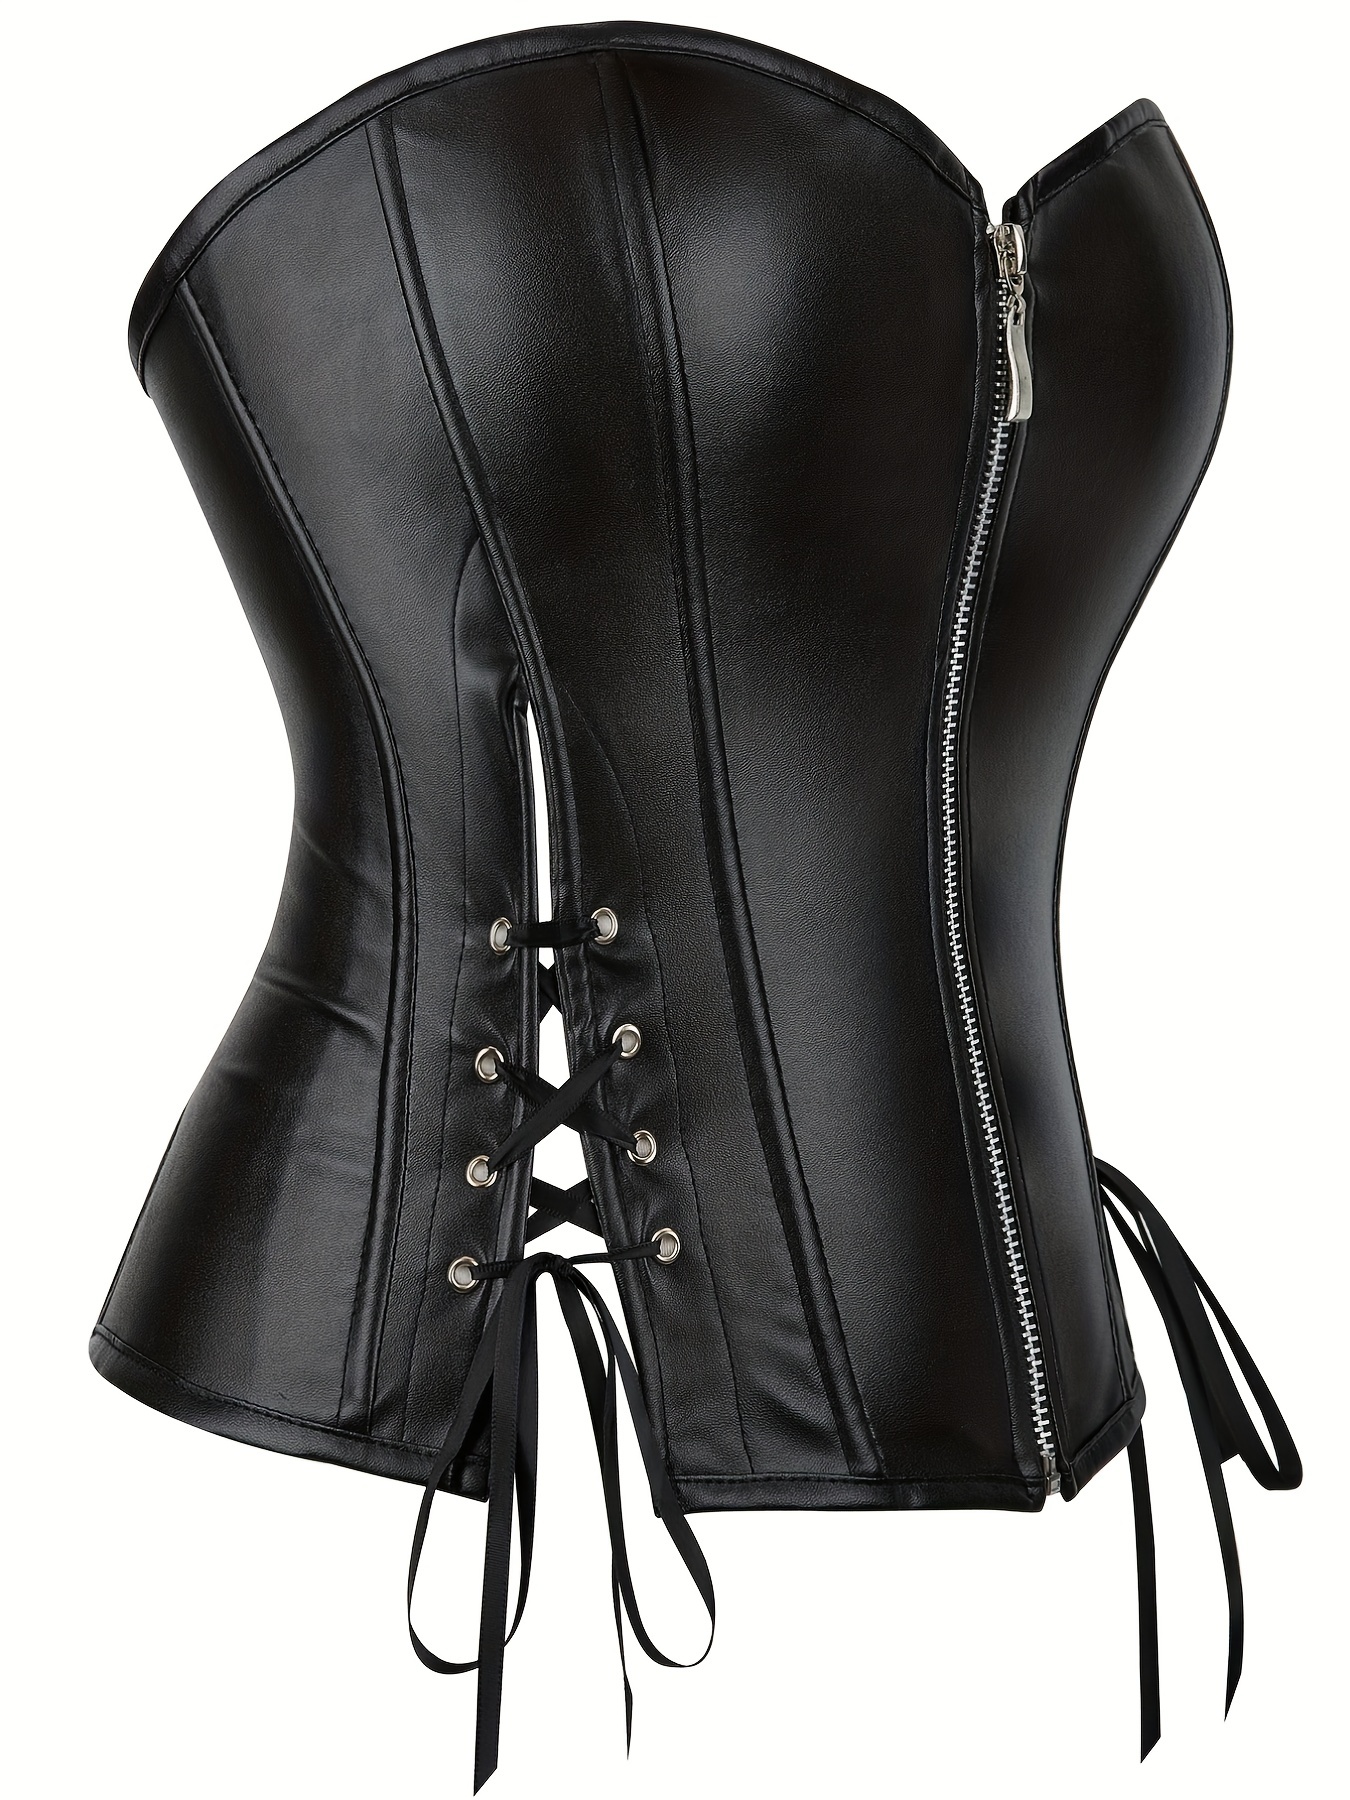 Orchid & Black Two-Toned Corset with Molded Zipper Front and Laced Back